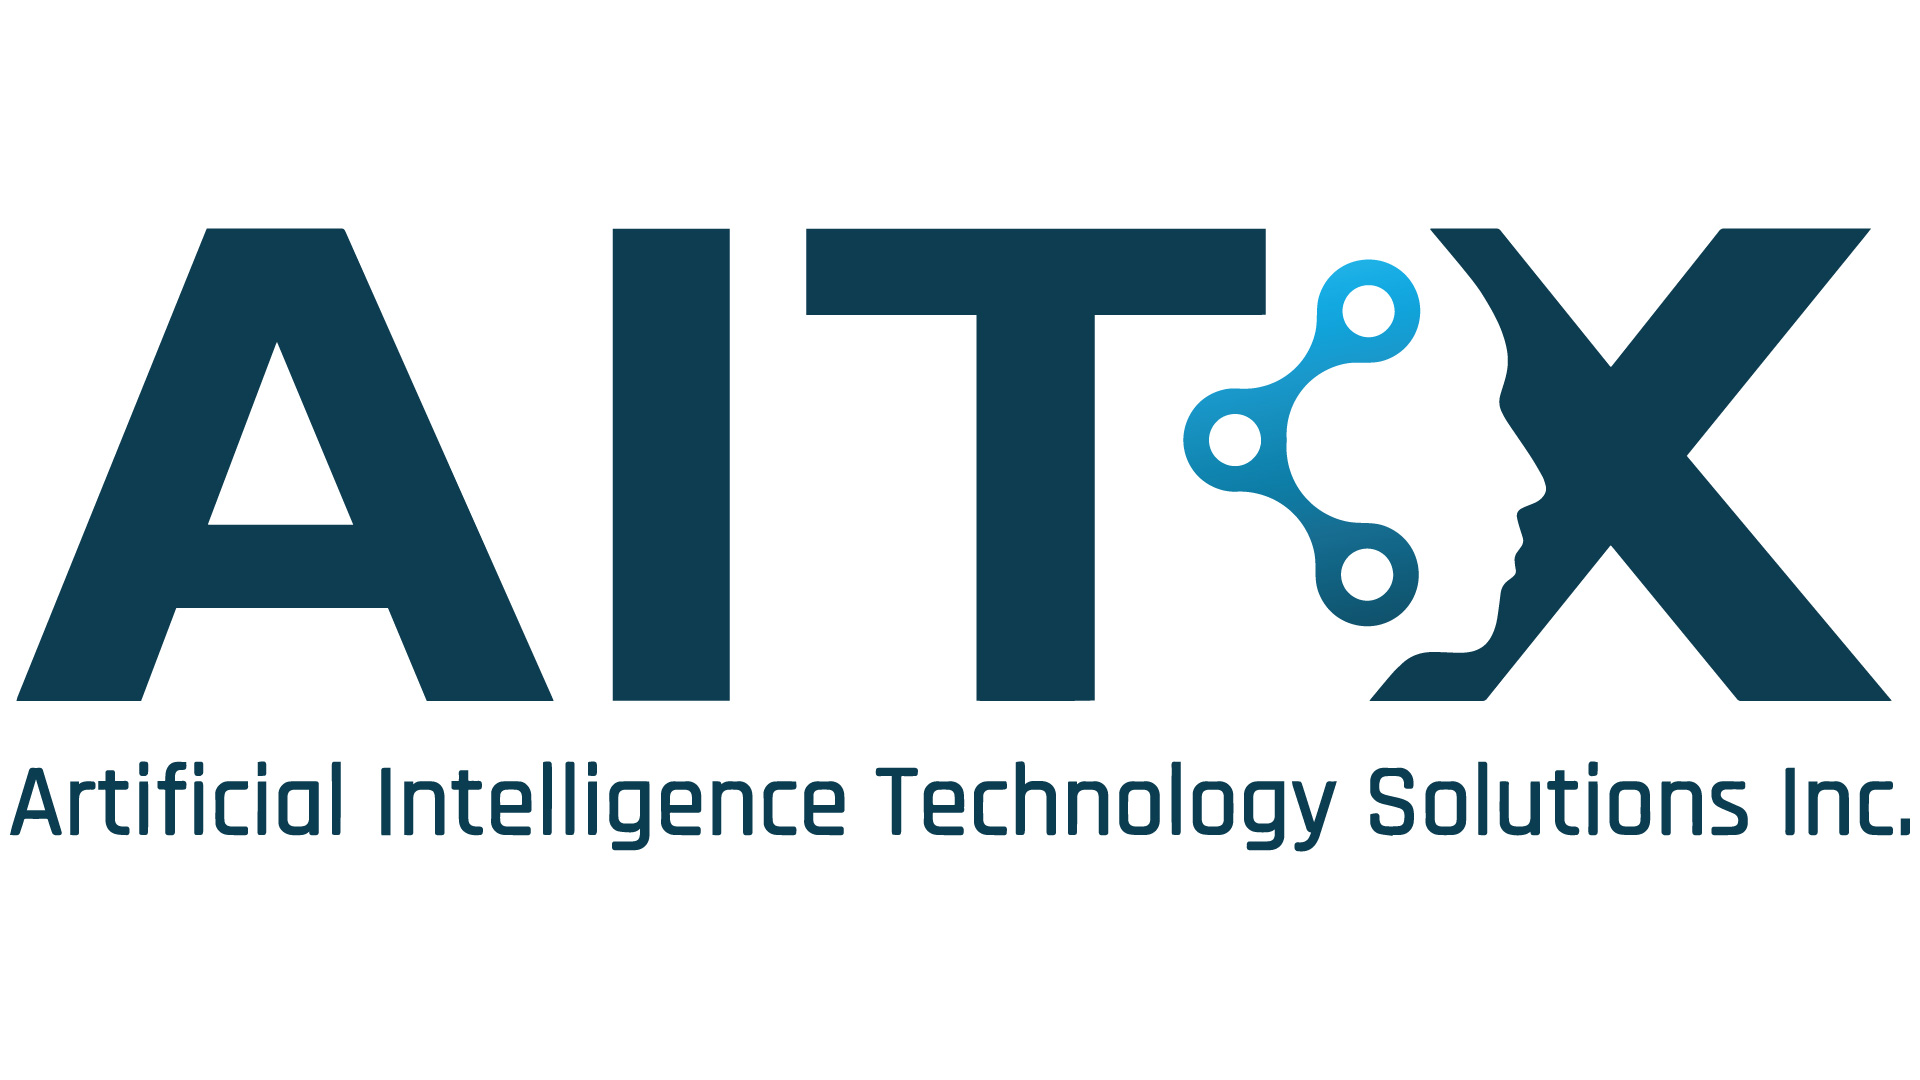 AITX Reaches New Heights as Q1 FY 2025 Revenue Soars